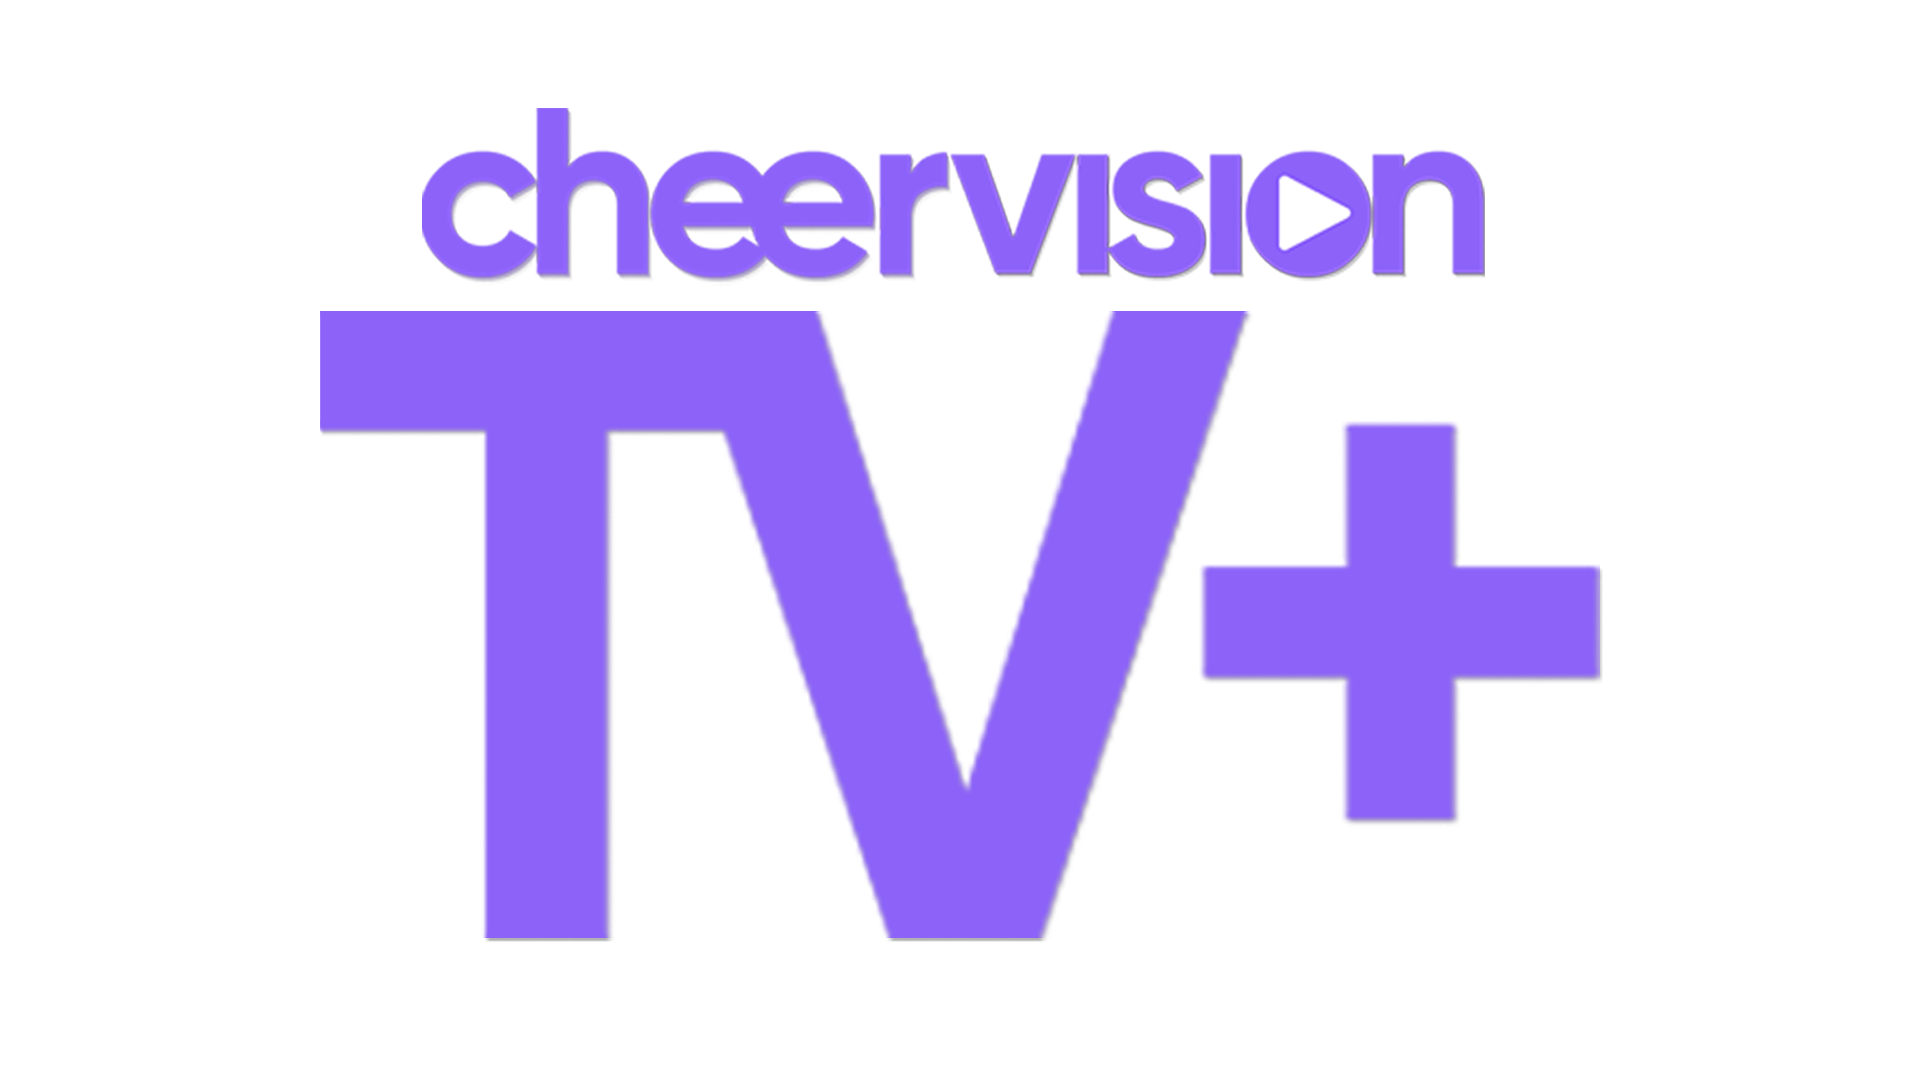 What is the difference between CheerVision TV+ and DVB-T2?